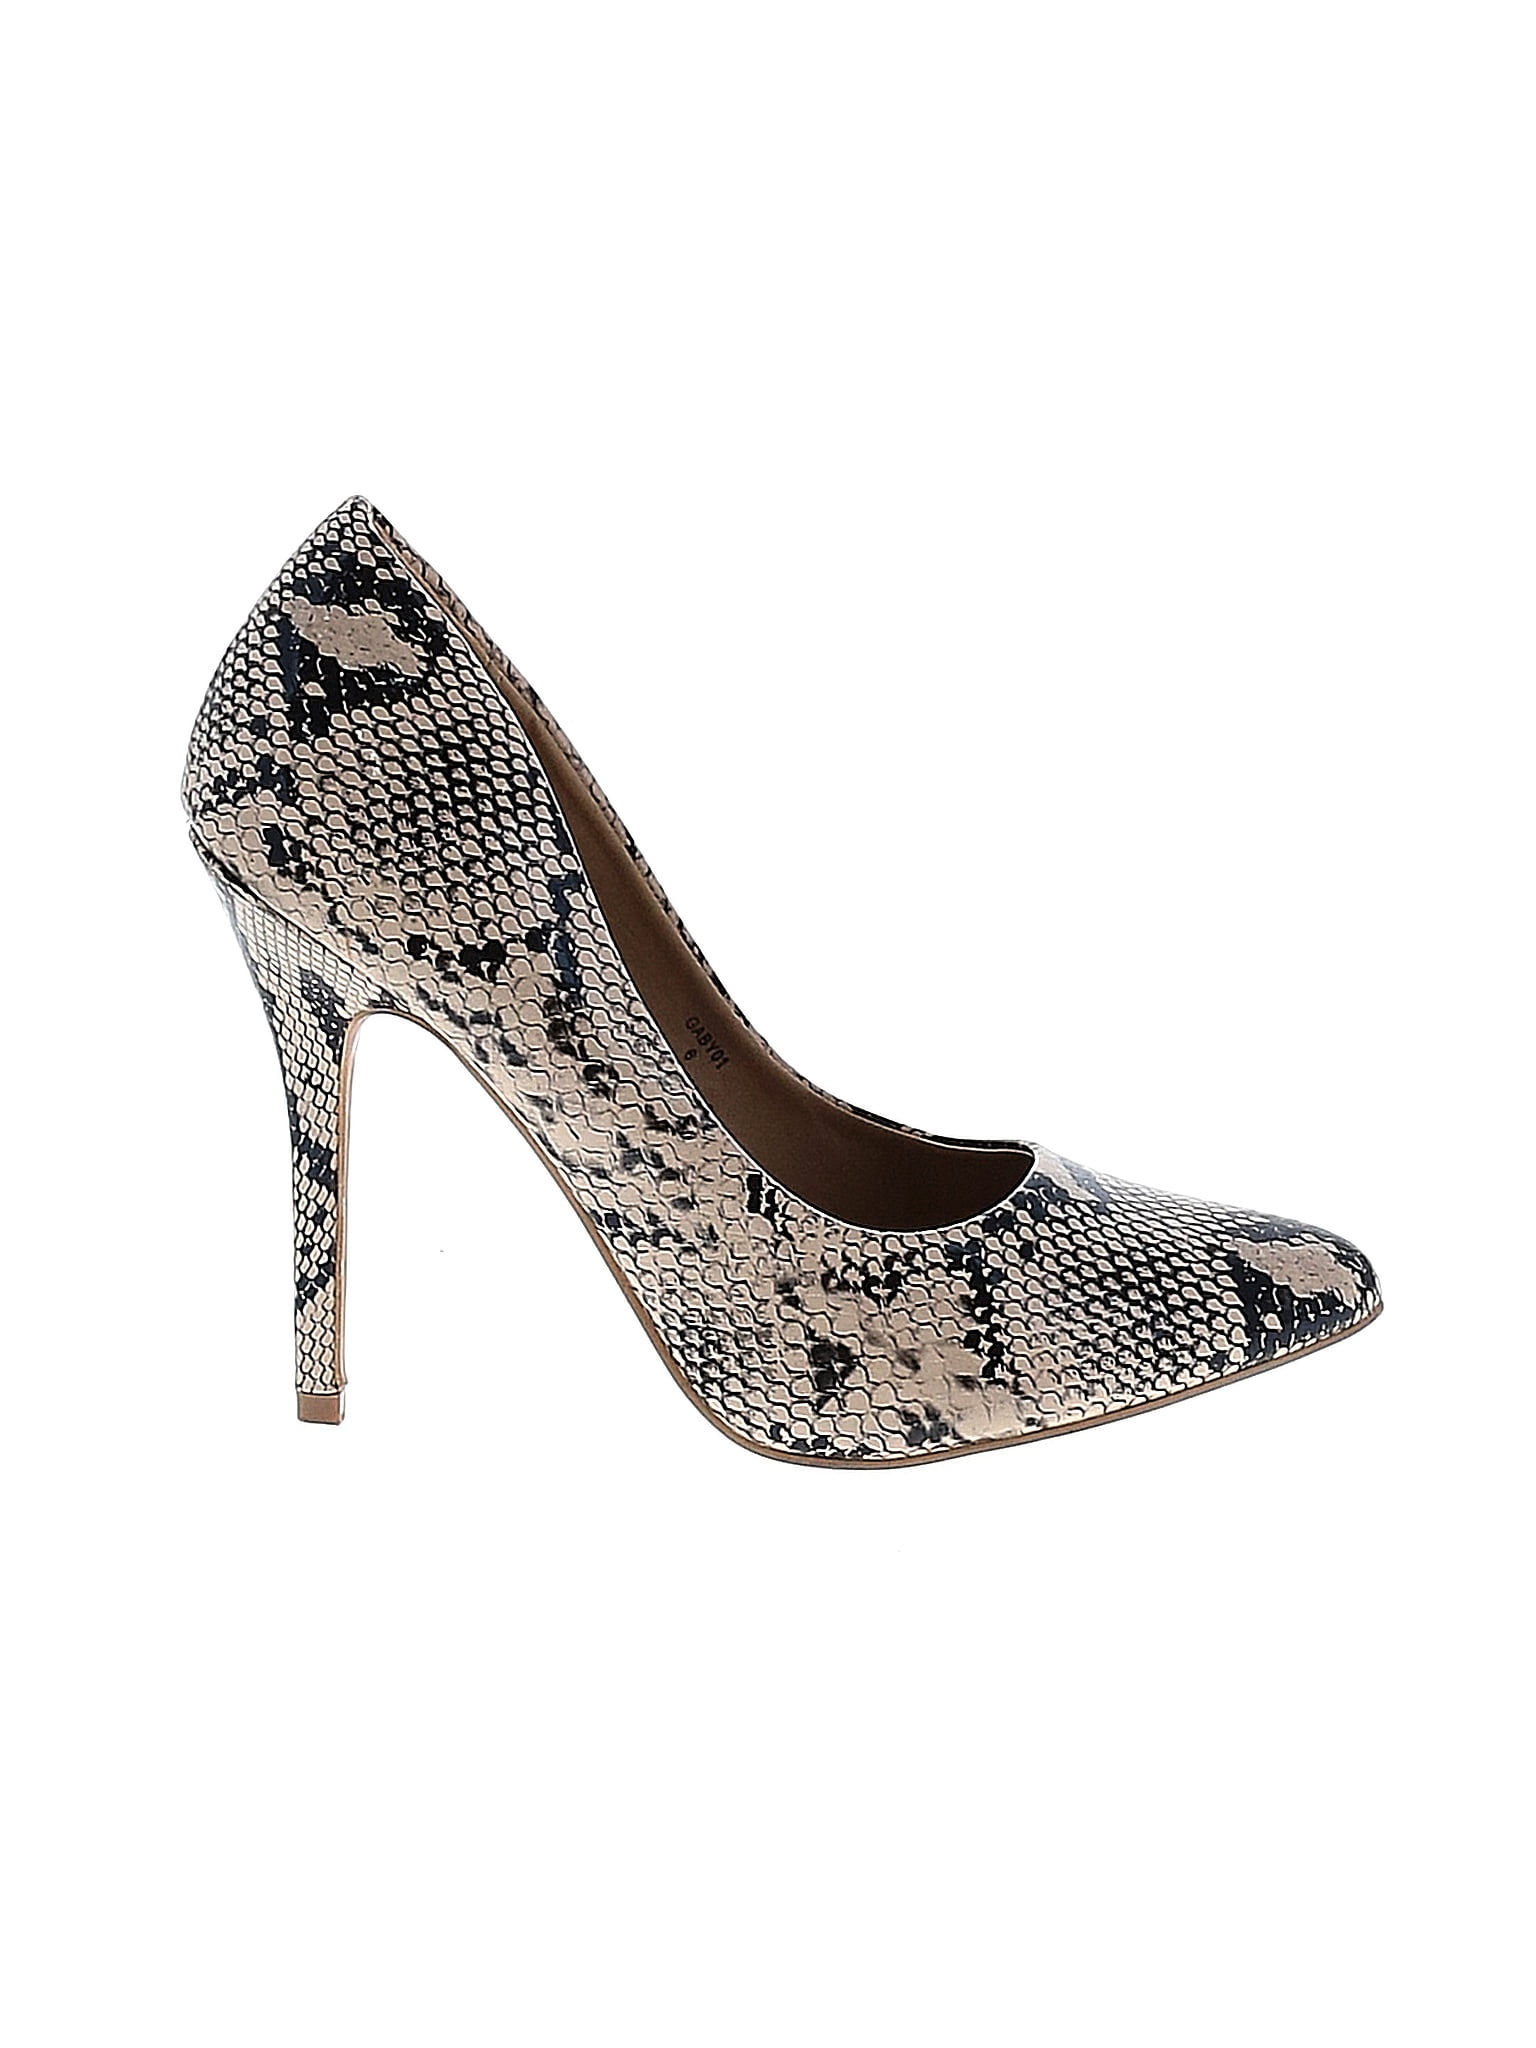 Riverberry Snake Print Multi Color Gray Heels Size 6 - 53% off